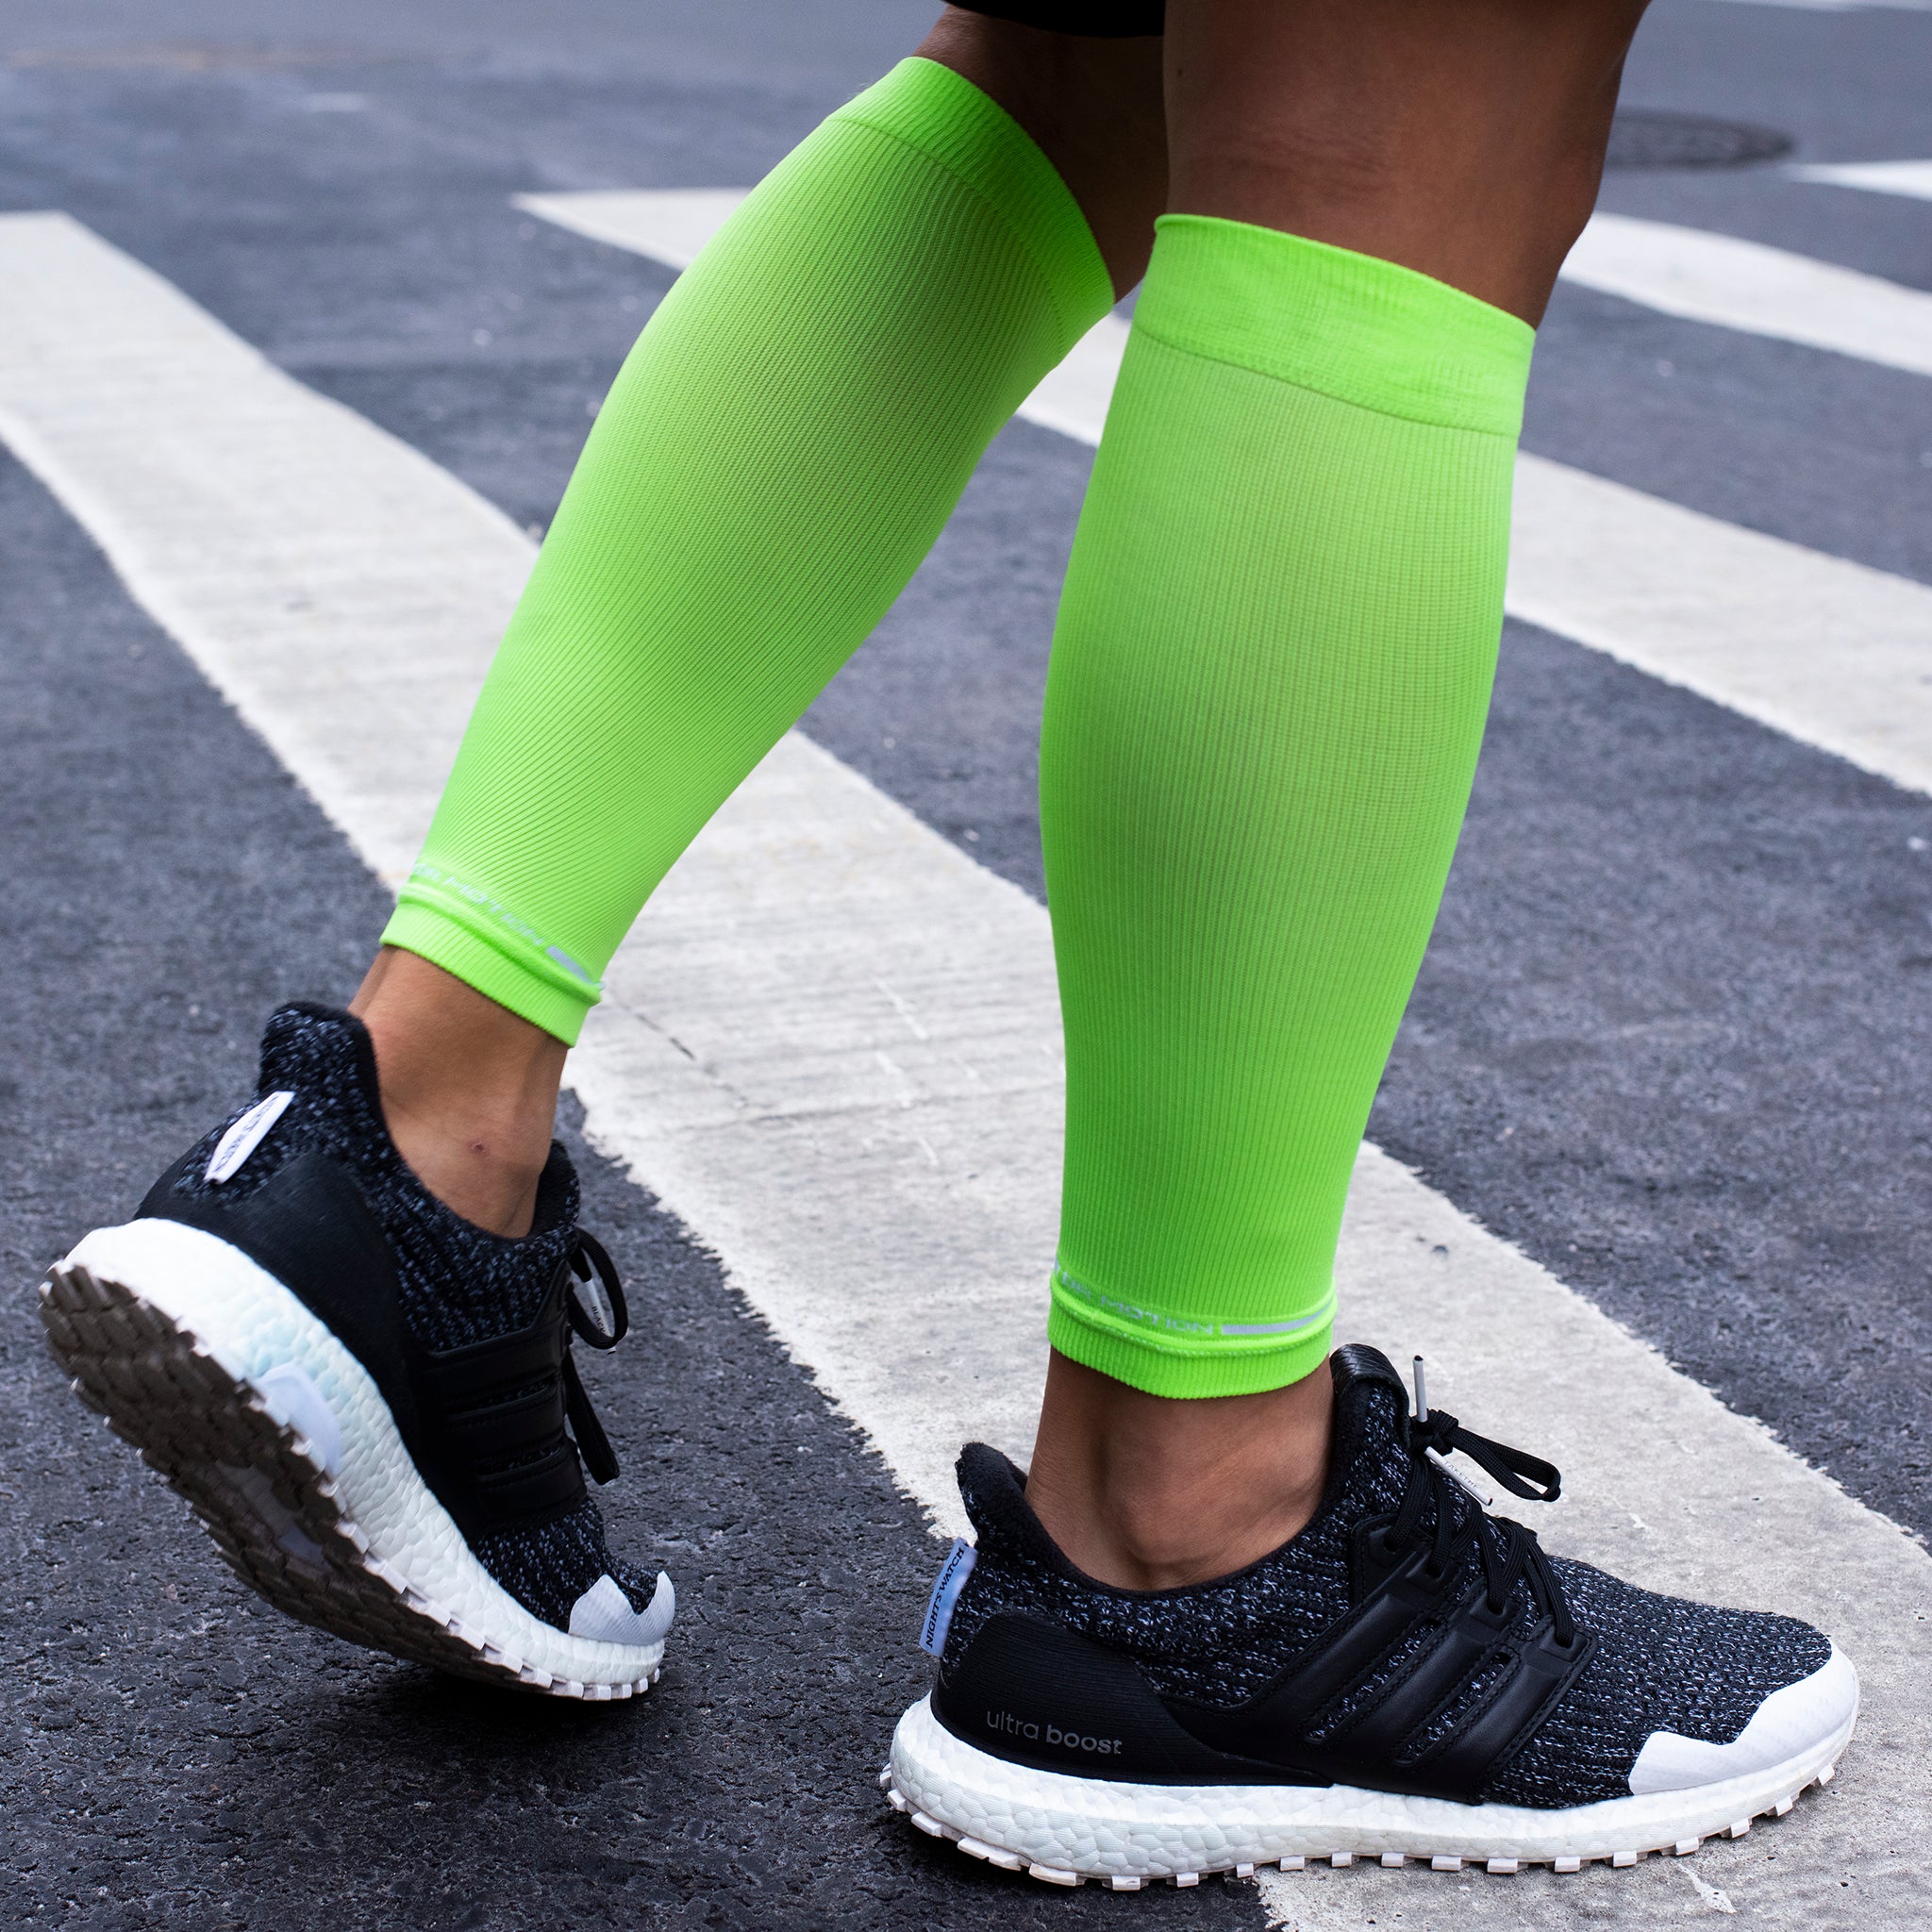 Solid | Compression Calf Sleeves For Men & Women